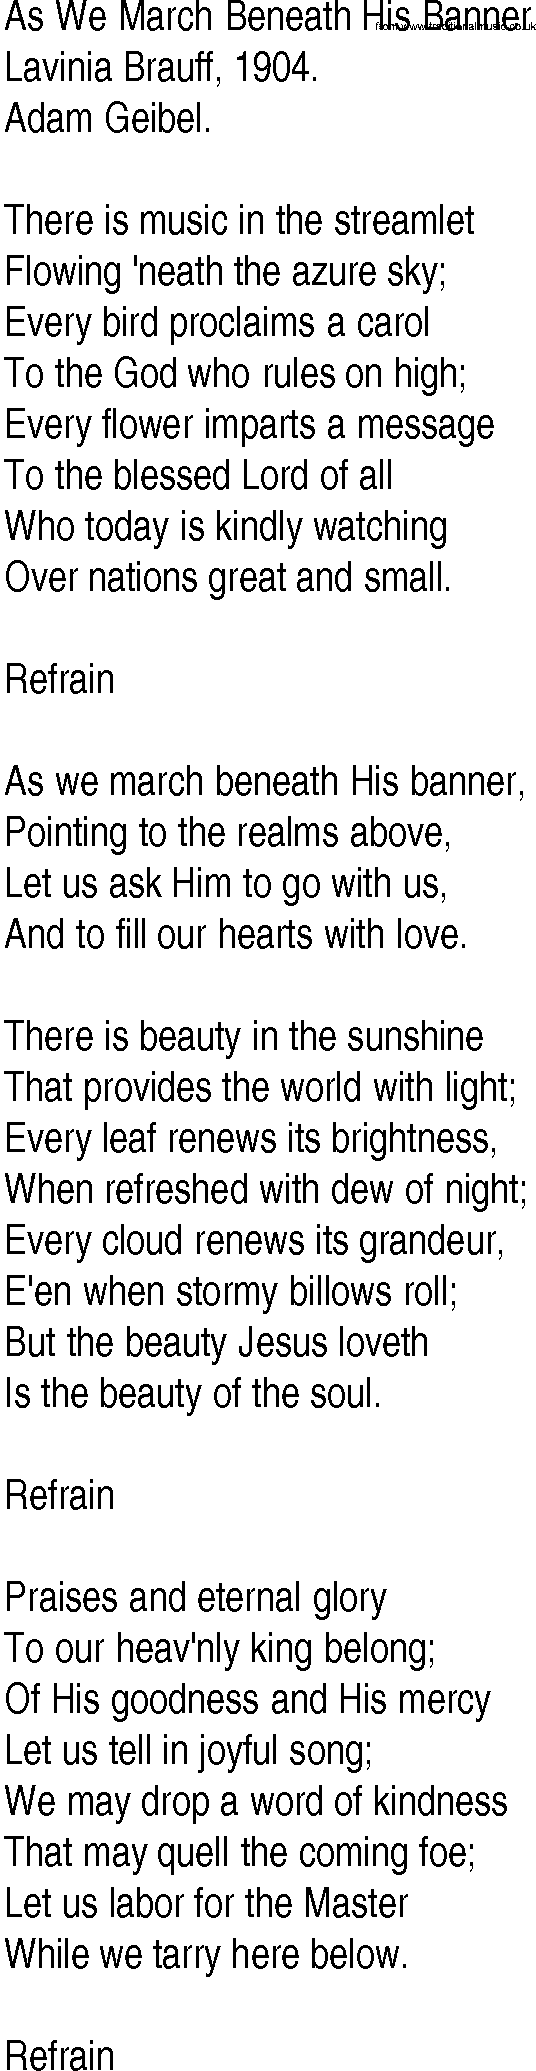 Hymn and Gospel Song: As We March Beneath His Banner by Lavinia Brauff lyrics